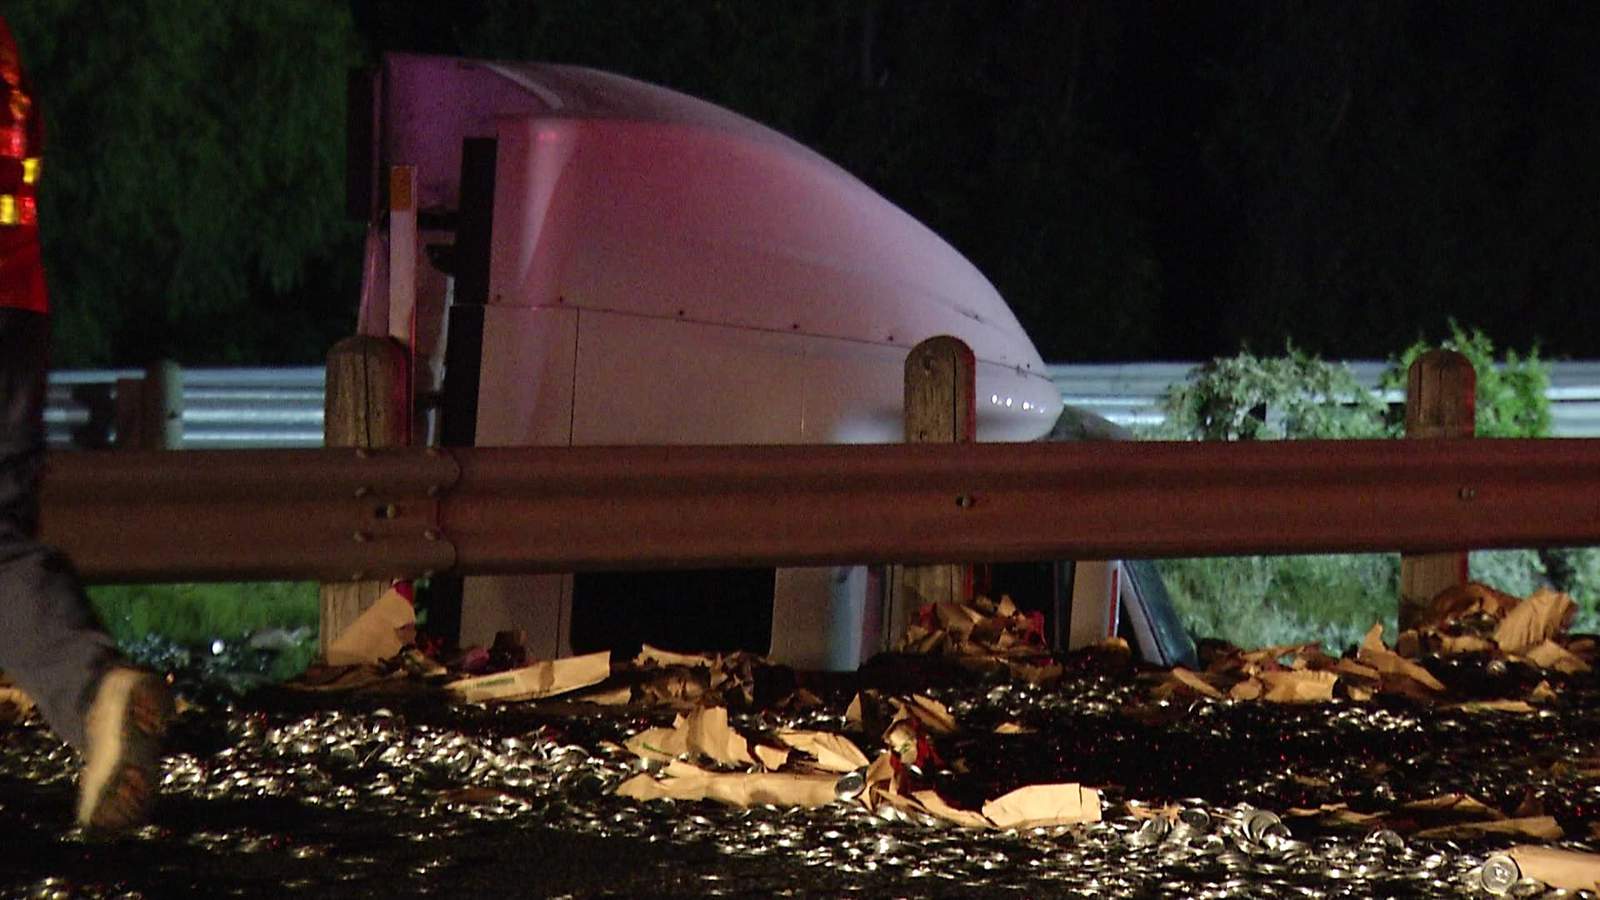 Soda can tops scattered all over highway following 18-wheeler crash in SW Bexar County